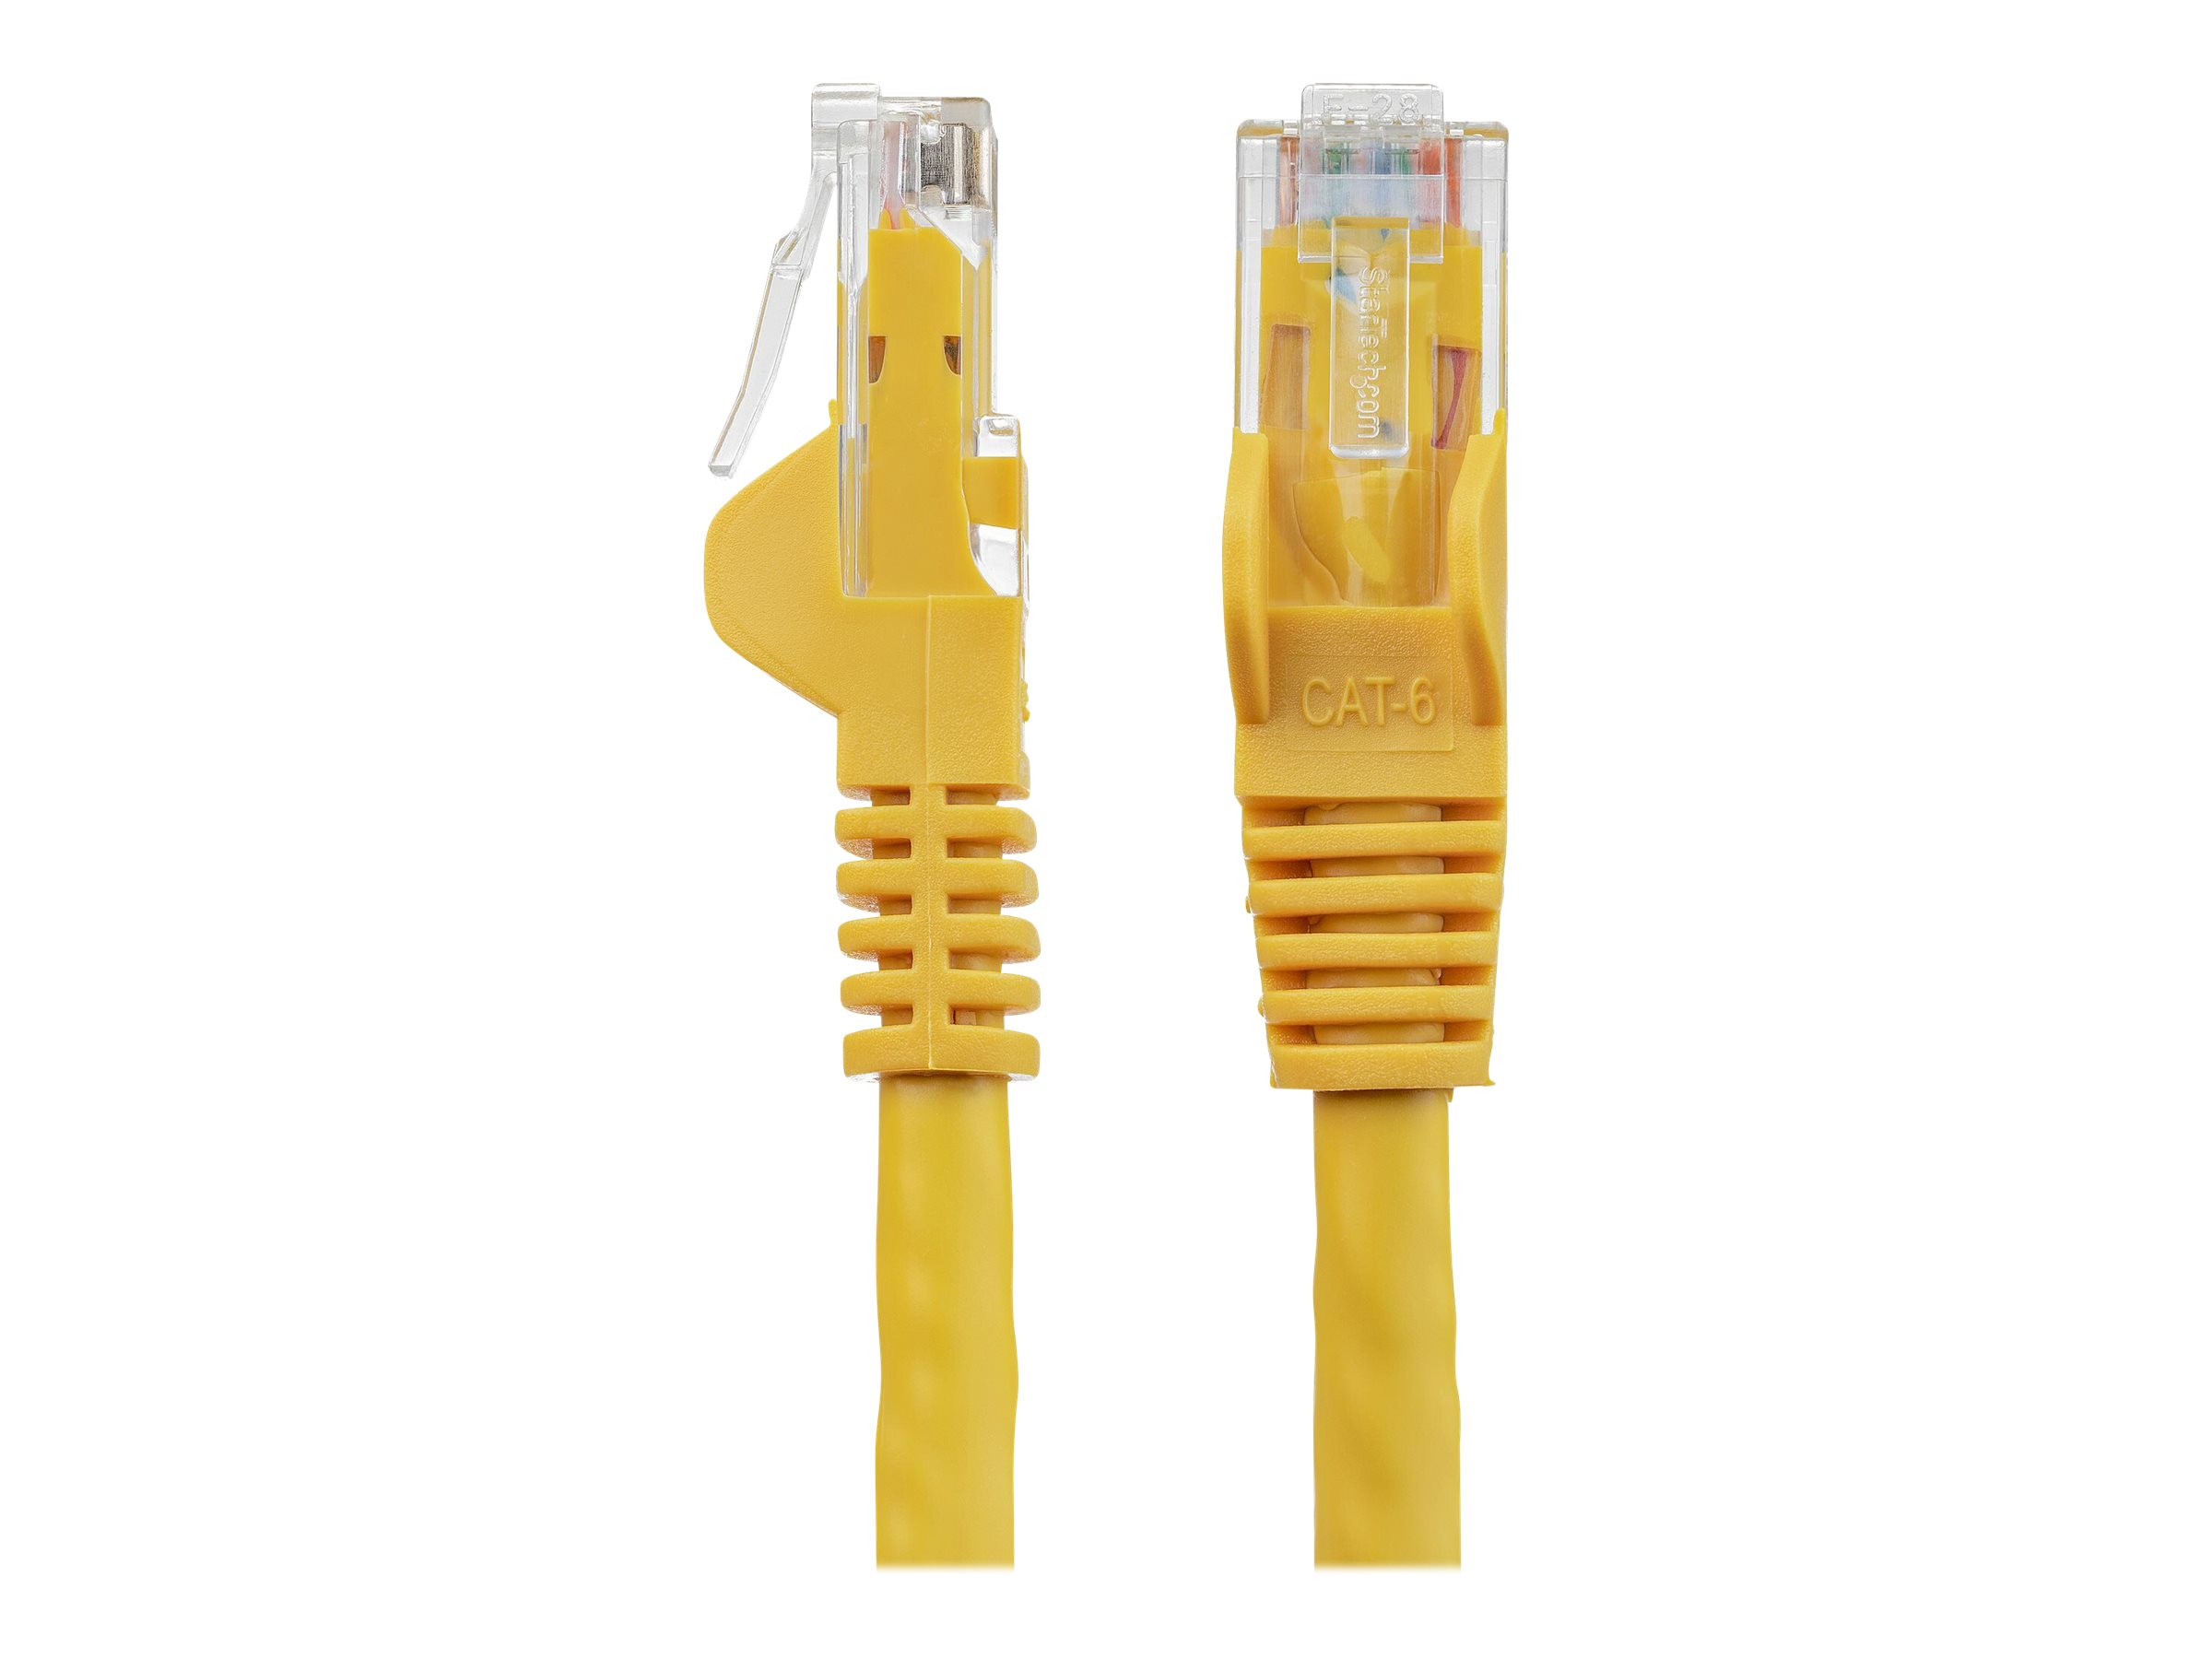 StarTech.com 10ft CAT6 Ethernet Cable, 10 Gigabit Snagless RJ45 650MHz 100W PoE Patch Cord, CAT 6 10GbE UTP Network Cable w/Strain Relief, Yellow, Fluke Tested/Wiring is UL Certified/TIA